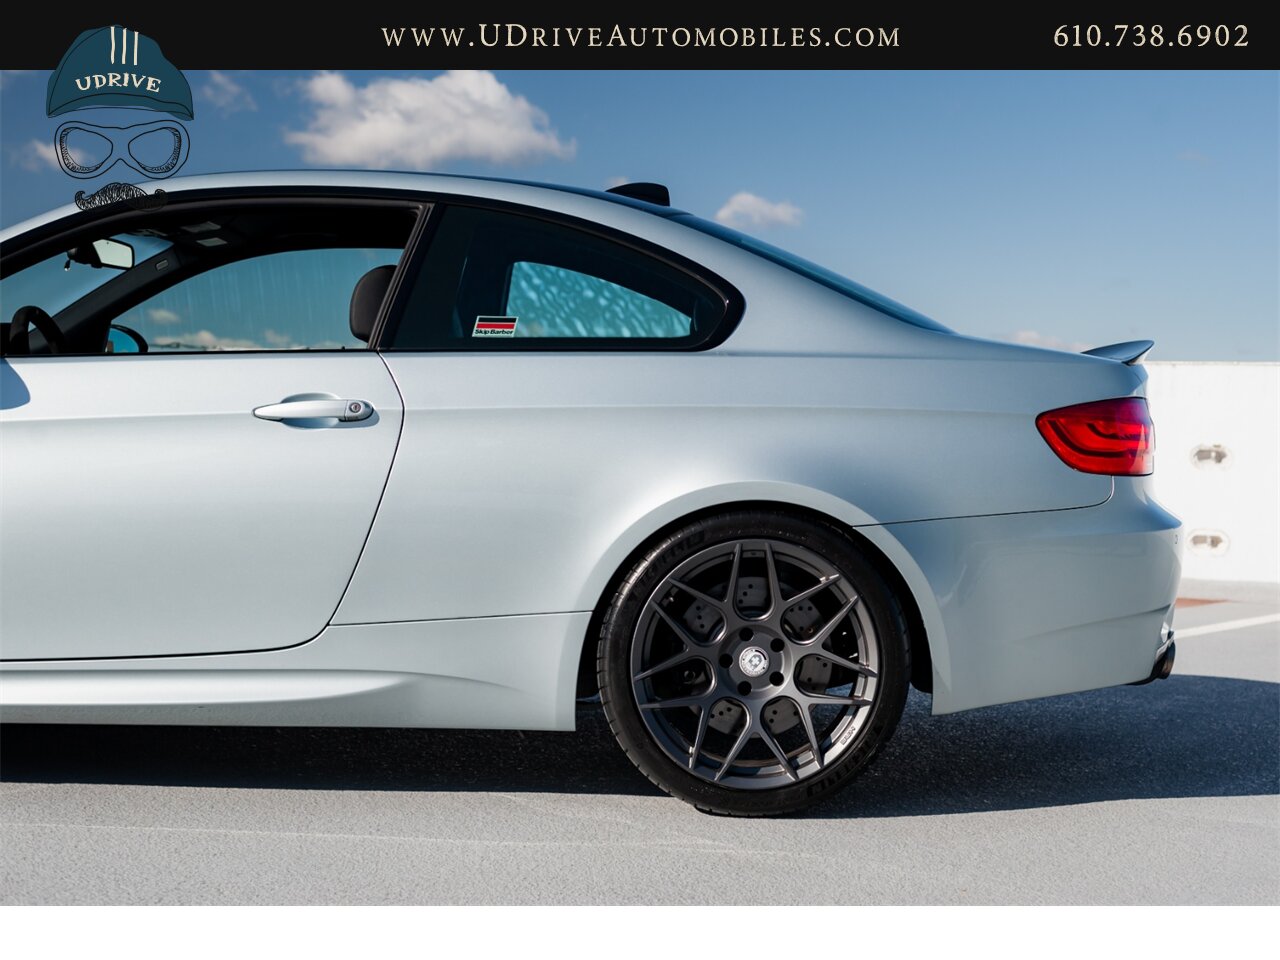 2008 BMW M3 Dinan S3-R M3 1 of 36 Produced DCT  1 Owner Full Service History 4.6L Stroker V8 - Photo 24 - West Chester, PA 19382